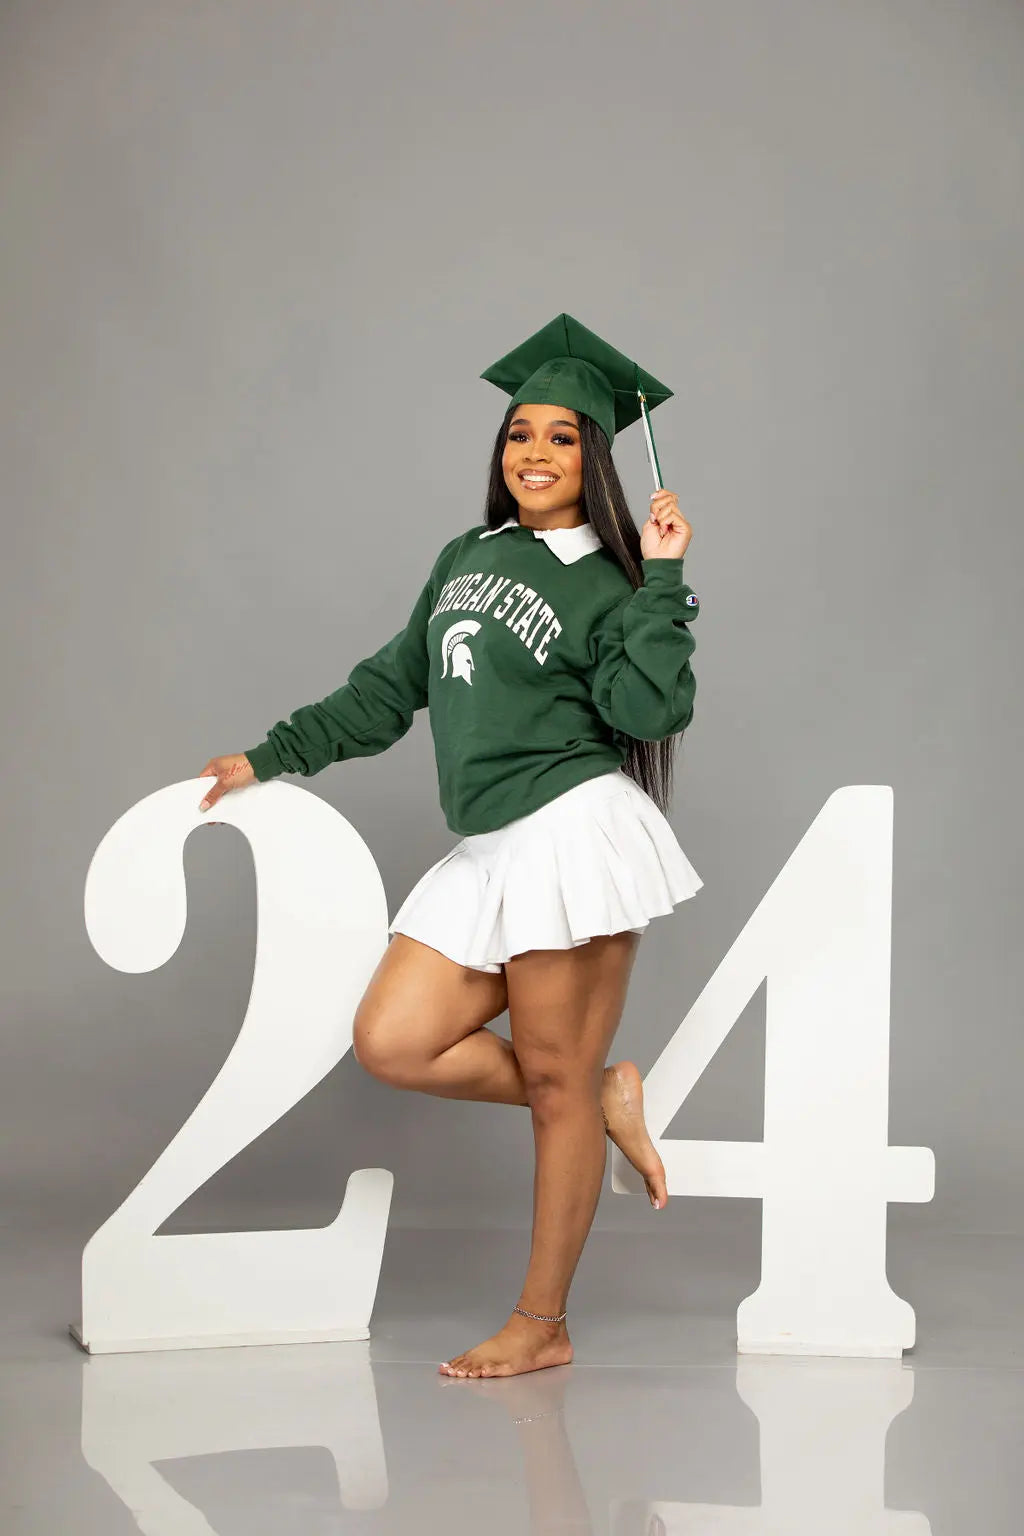 Photography Props for seniors, beautiful senior graduate with giant 24 prop.